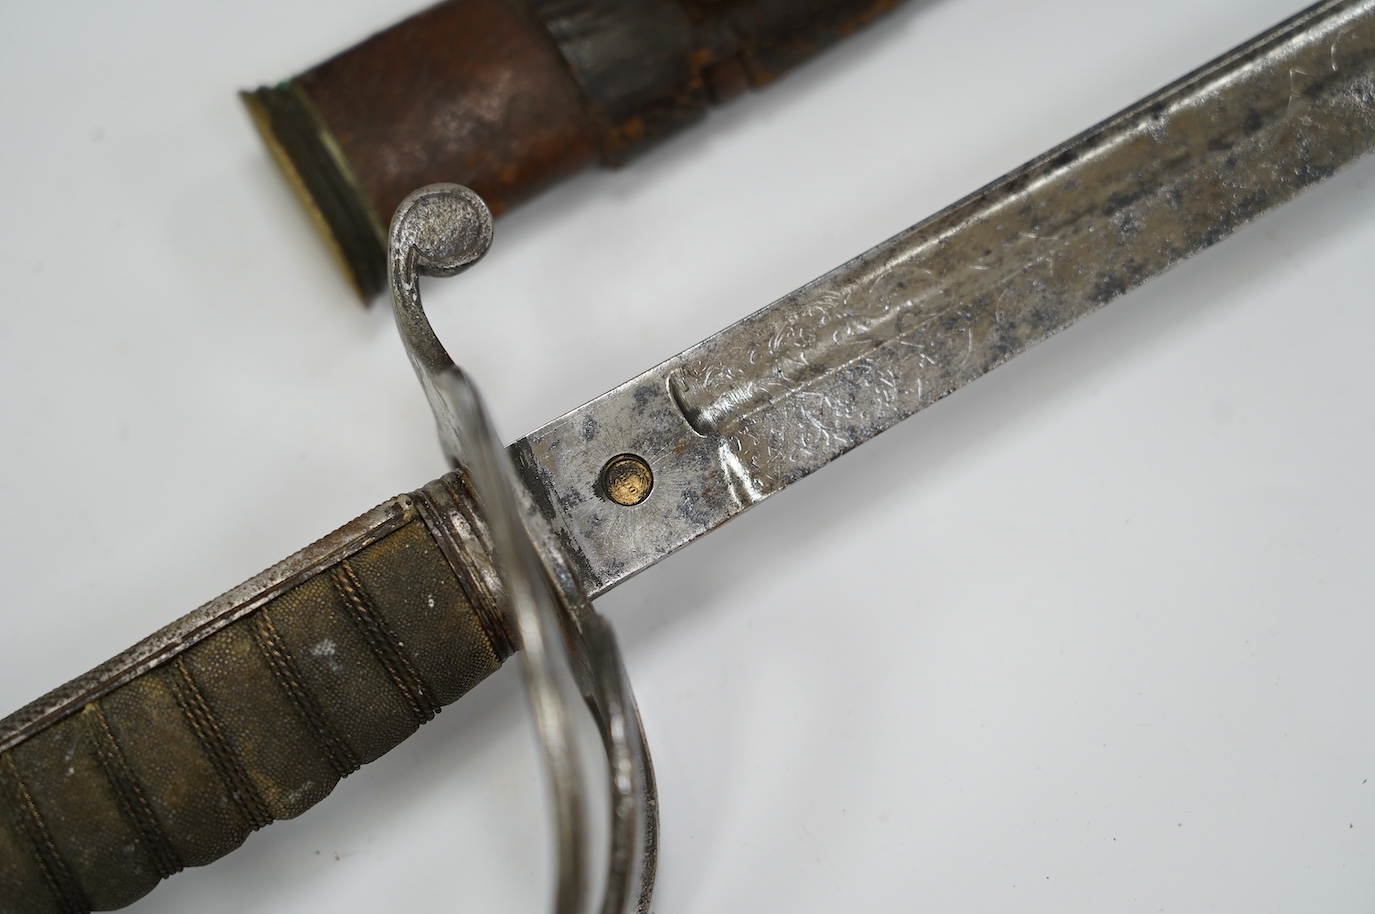 A George V Royal Artillery sword, regulation blade and hilt, in its leather scabbard, blade 90cm. Condition - poor, heavily pitted